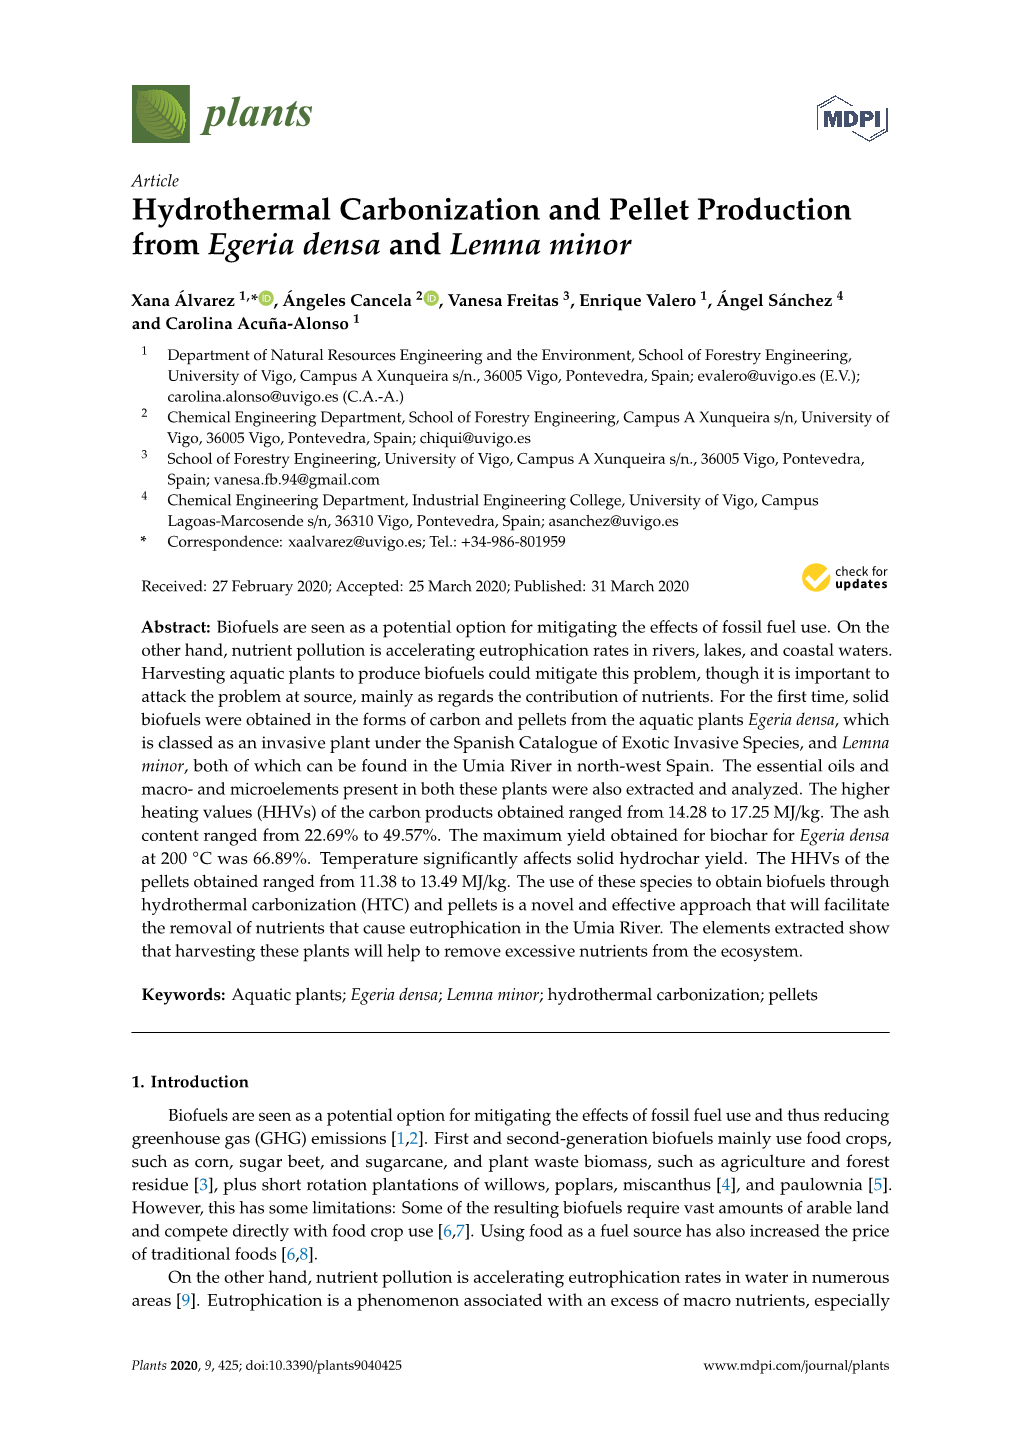 Hydrothermal Carbonization and Pellet Production from Egeria Densa and Lemna Minor